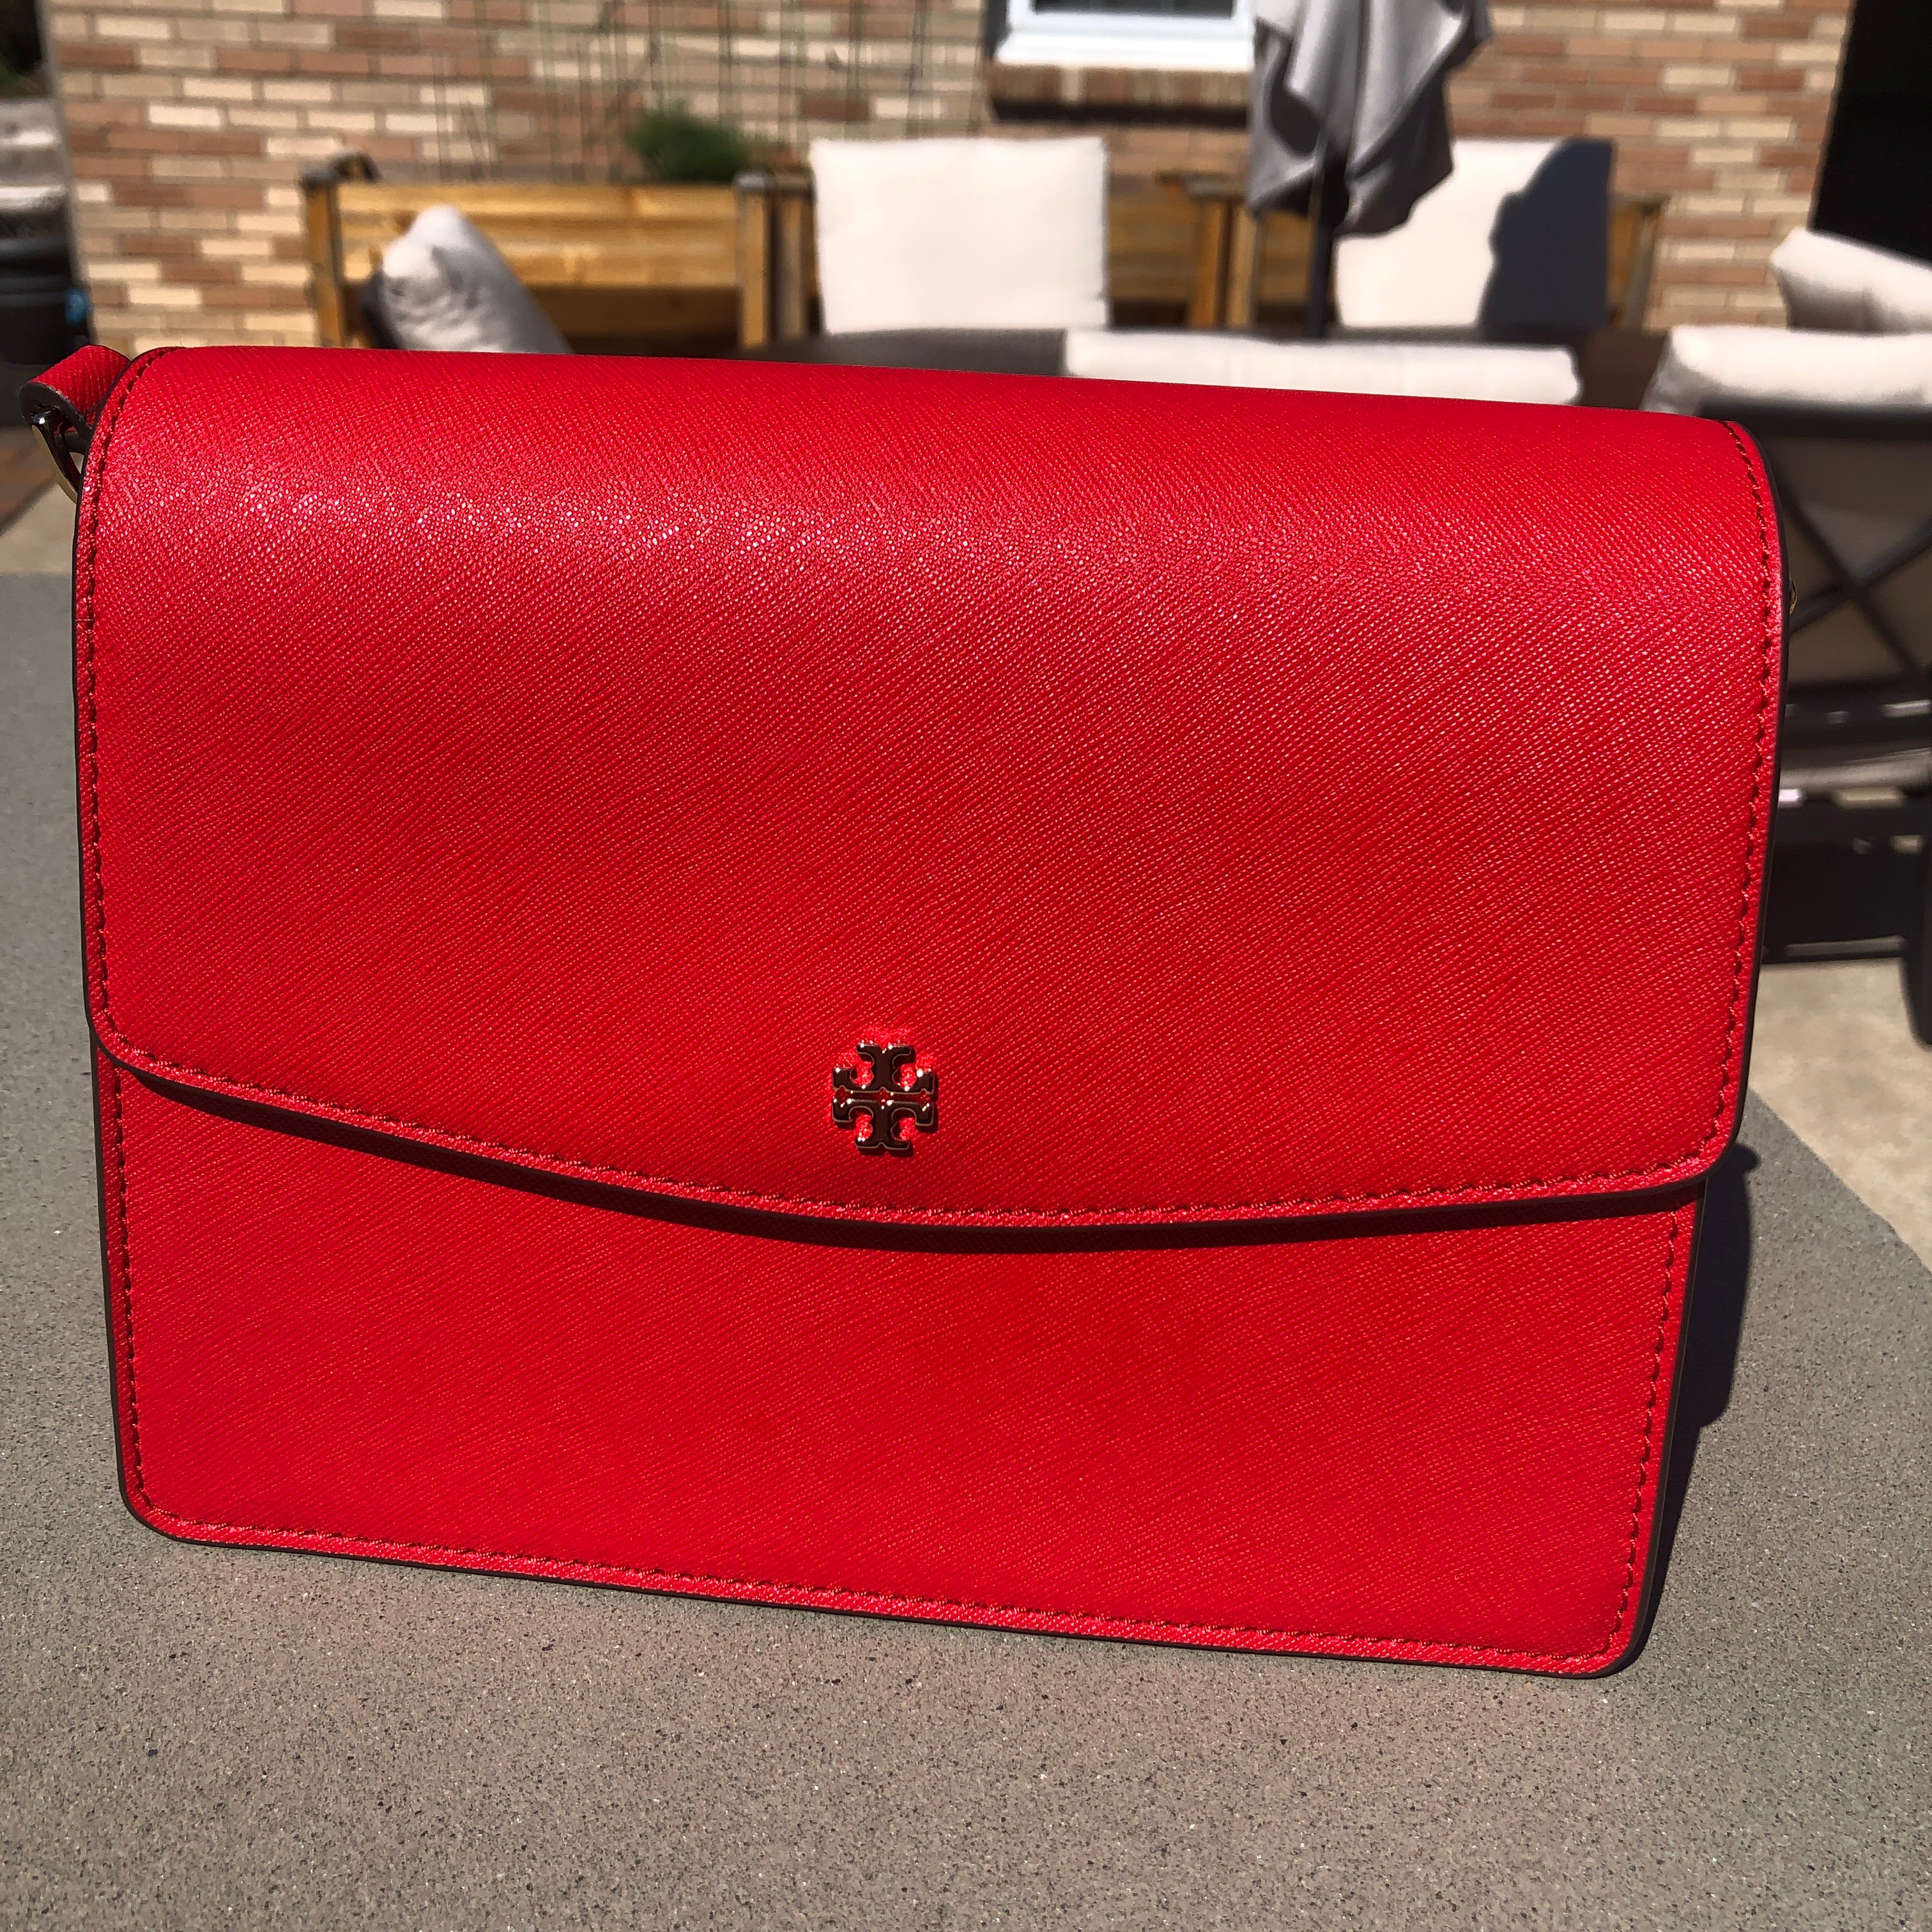 Tory Burch NWT Emerson Mini Shoulder Bag Red Size One Size - $270 (22% Off  Retail) New With Tags - From Kari